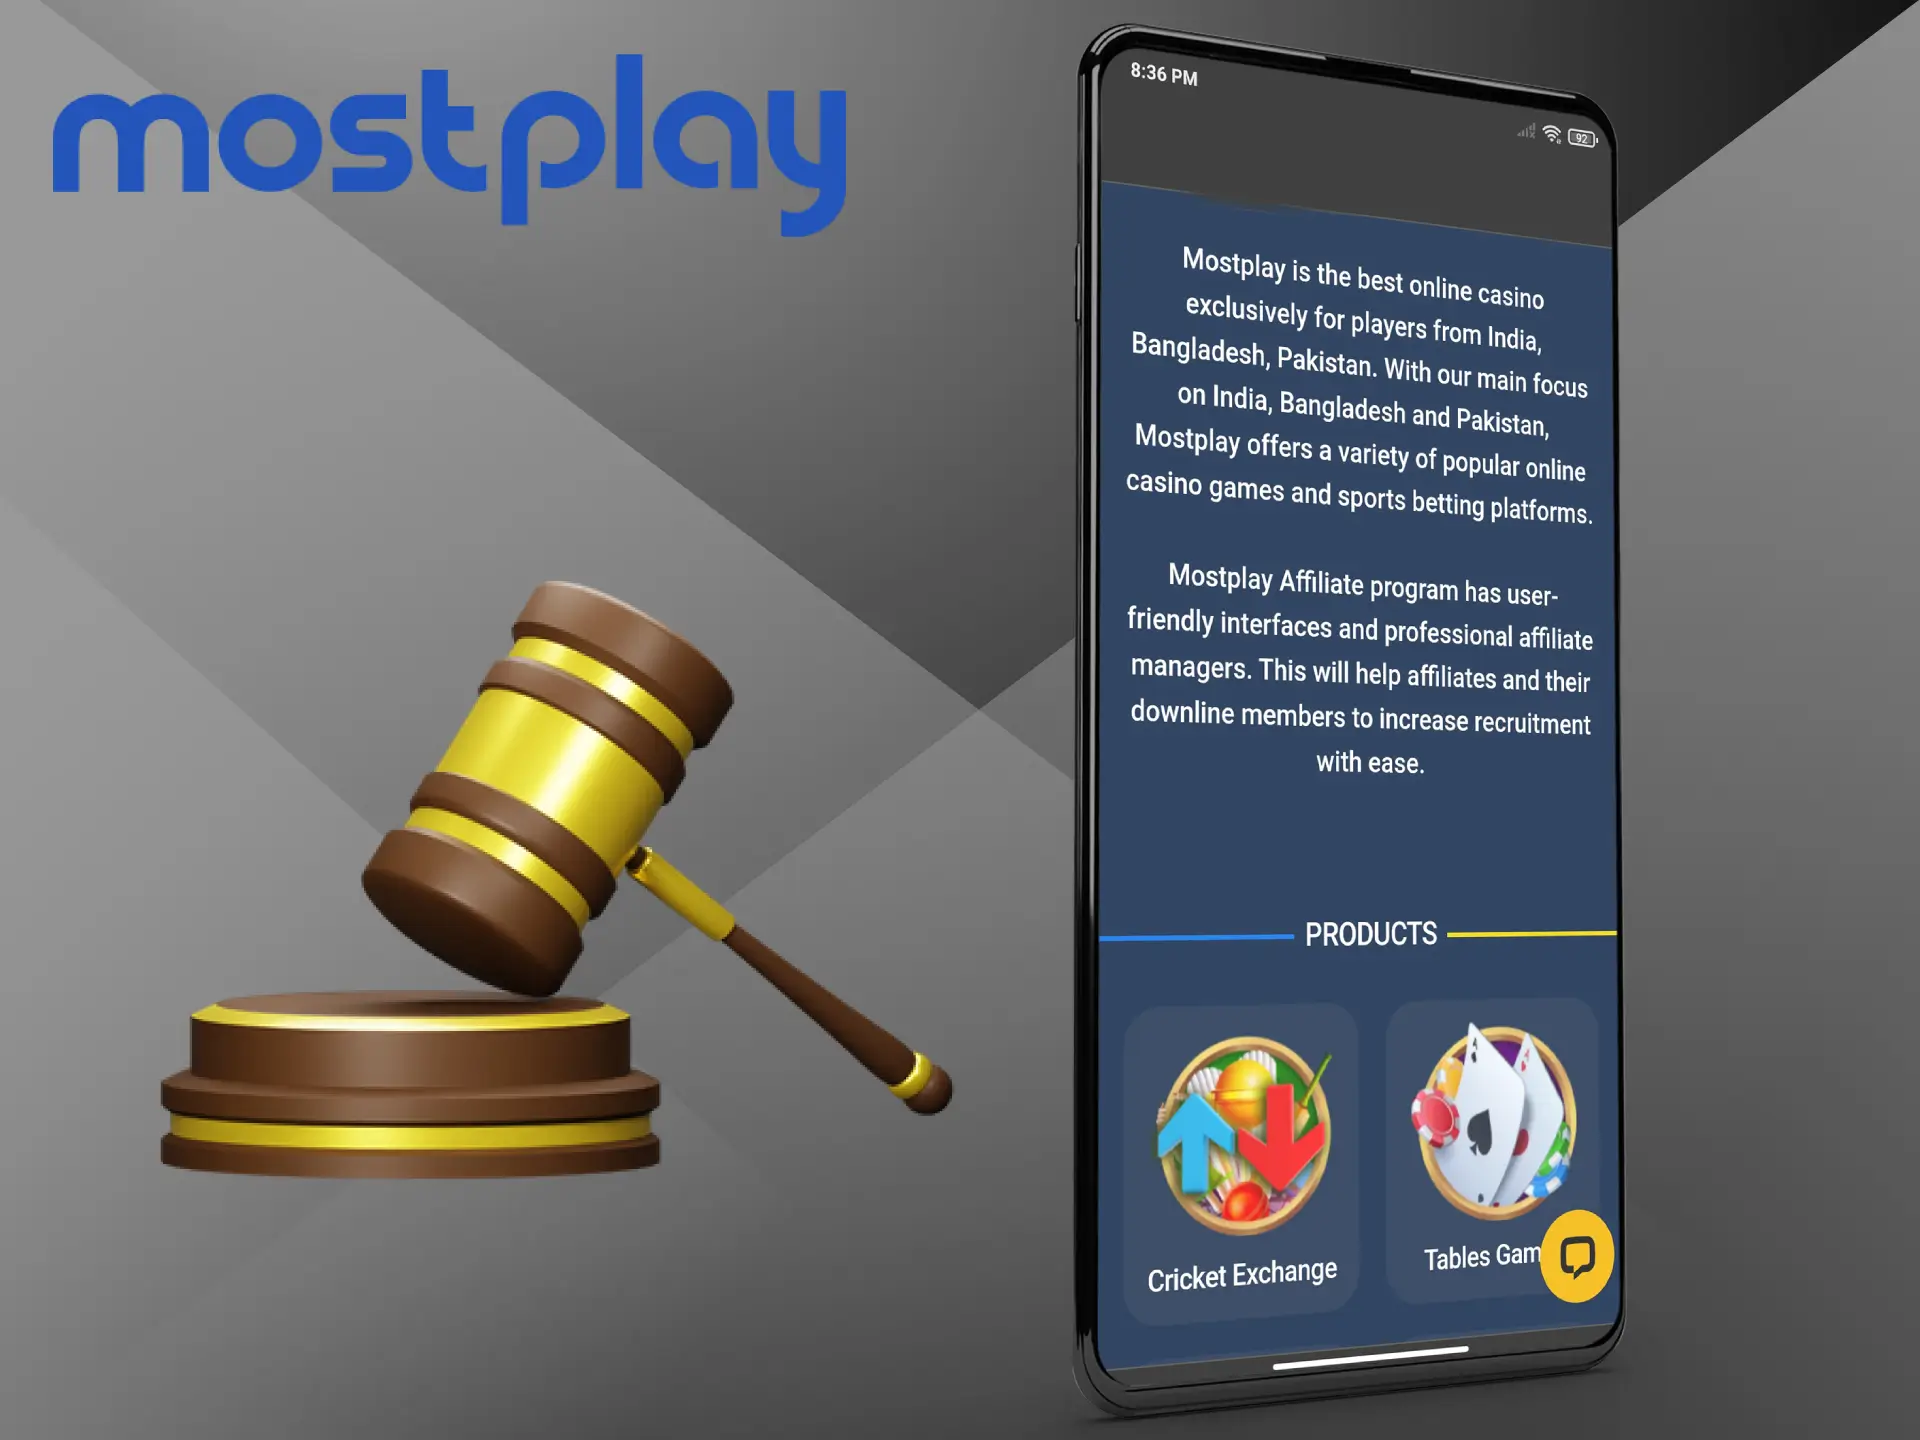 Read the rules of the Mostplay casino affiliate programme carefully.